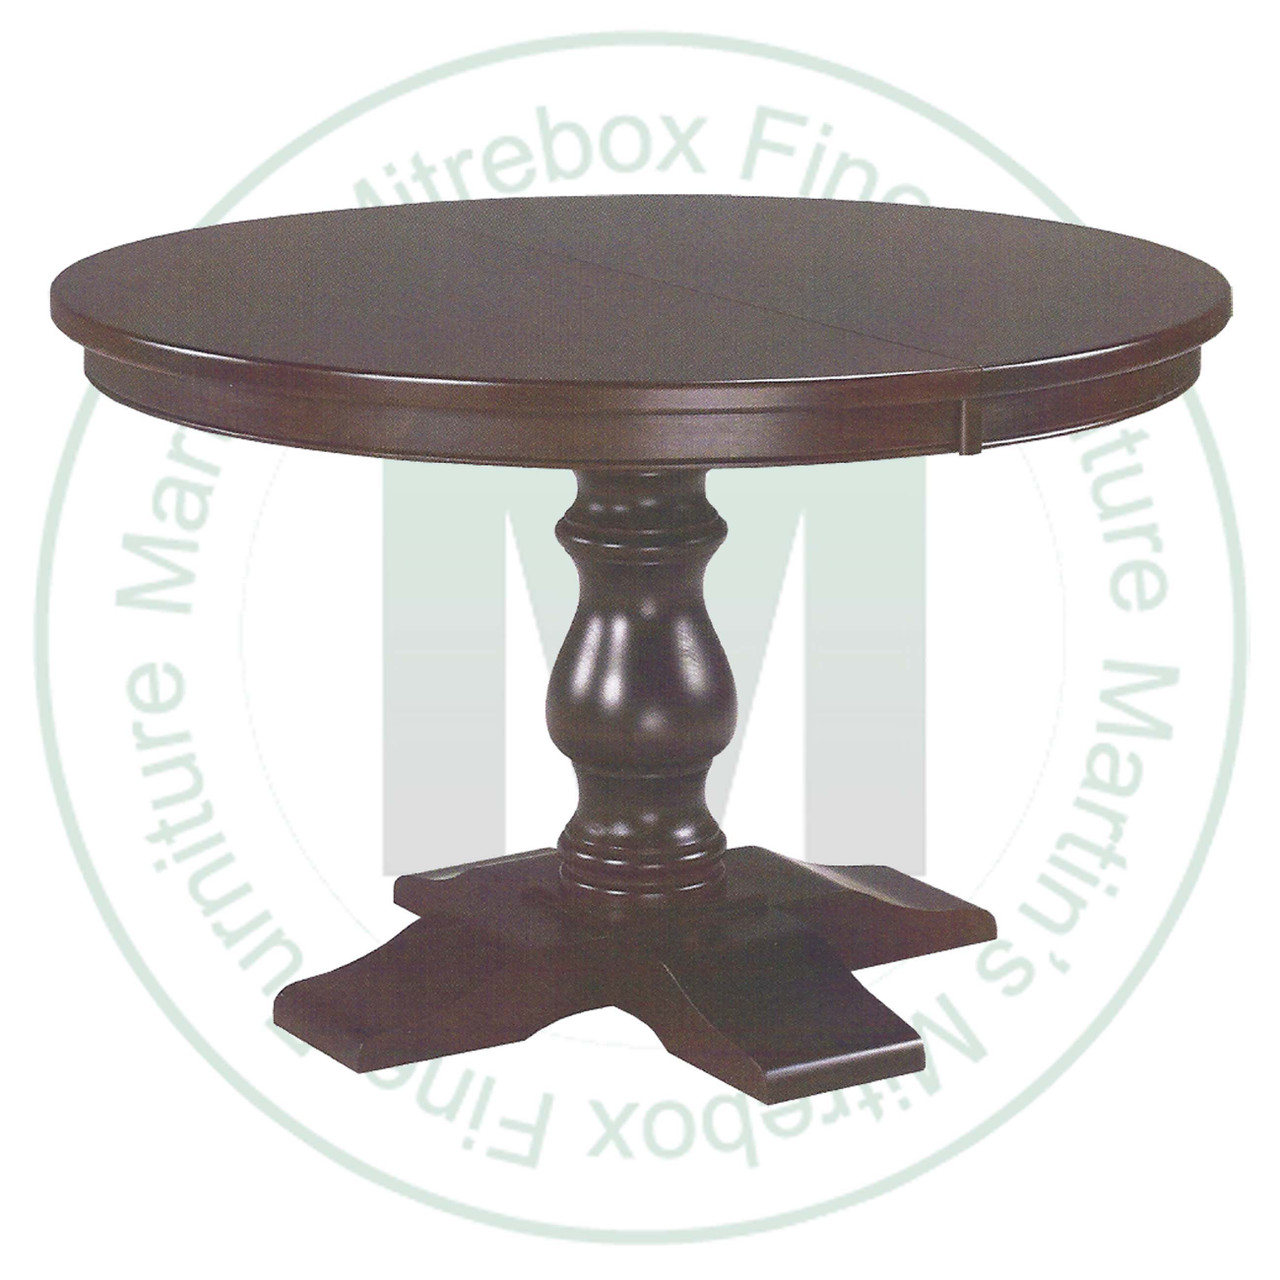 Oak Savannah Single Pedestal Table 42''D x 48''W x 30''H Round Solid Table. Table Has 1'' Thick Top.